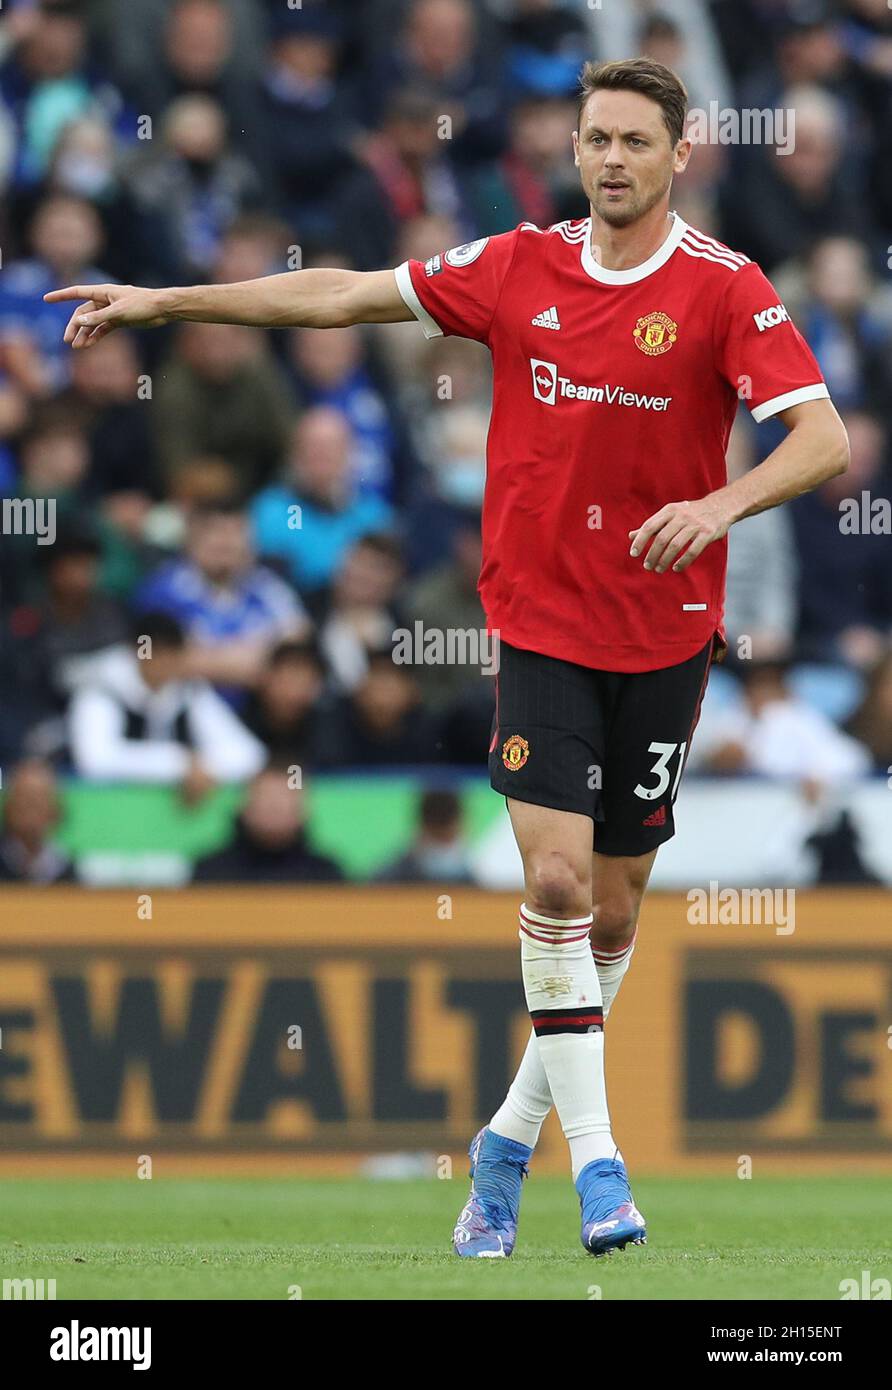 Leicester, England, 16th October 2021.  Nemanja Matic of Manchester United during the Premier League match at the King Power Stadium, Leicester. Picture credit should read: Darren Staples / Sportimage Stock Photo